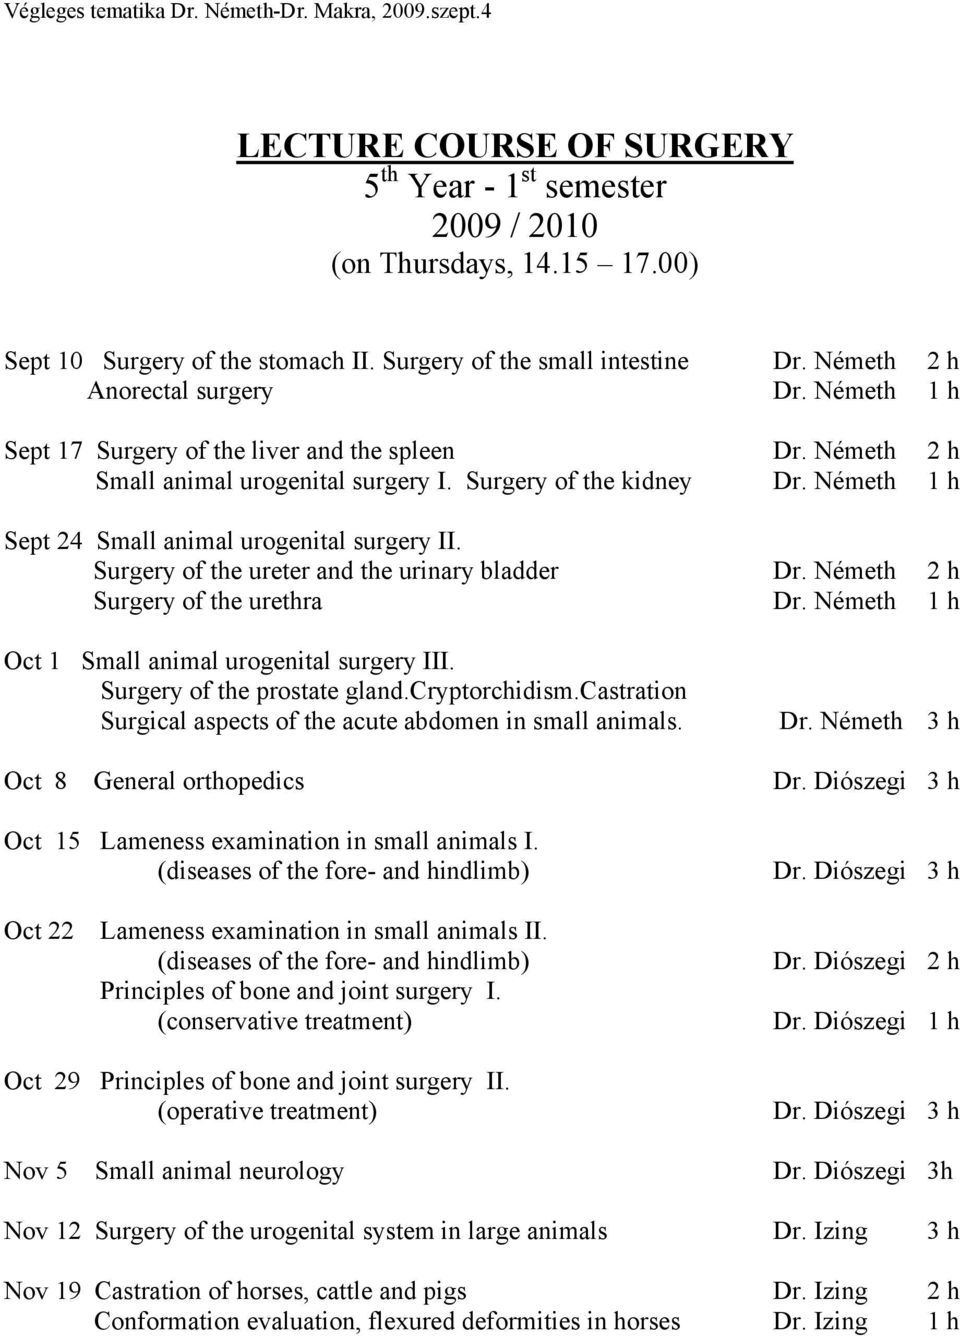 Surgery of the ureter and the urinary bladder Dr. Németh 2 h Surgery of the urethra Dr. Németh 1 h Oct 1 Small animal urogenital surgery III. Surgery of the prostate gland.cryptorchidism.